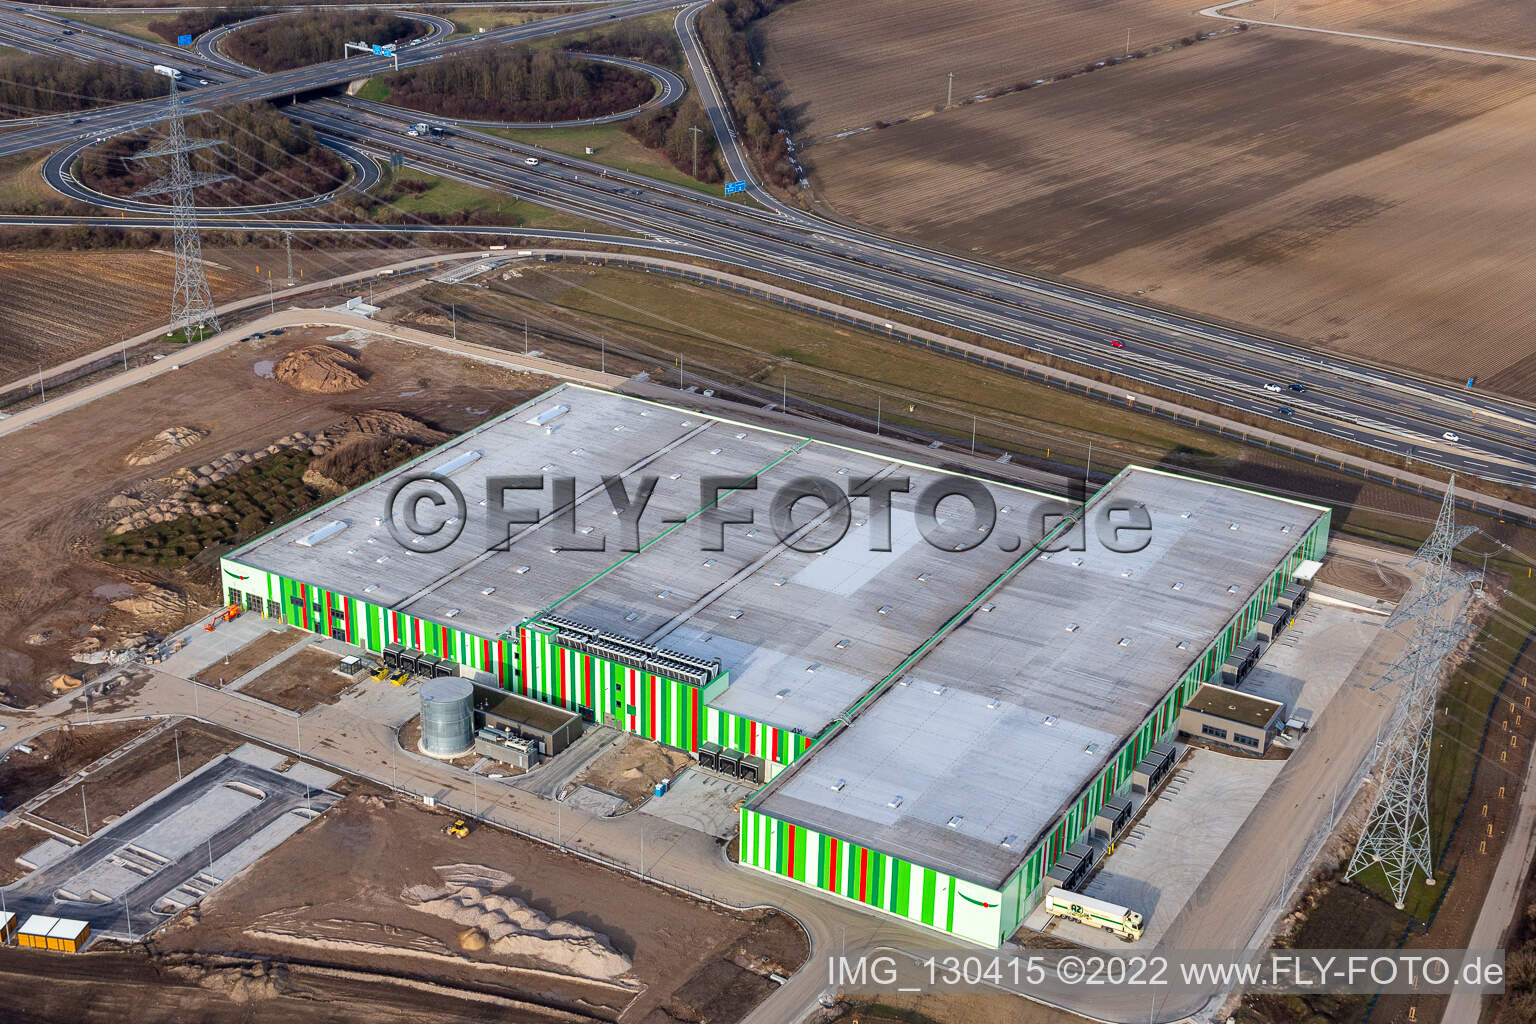 Oblique view of New construction of the Pfalzmarkt for fruit and vegetables in Mutterstadt in the state Rhineland-Palatinate, Germany